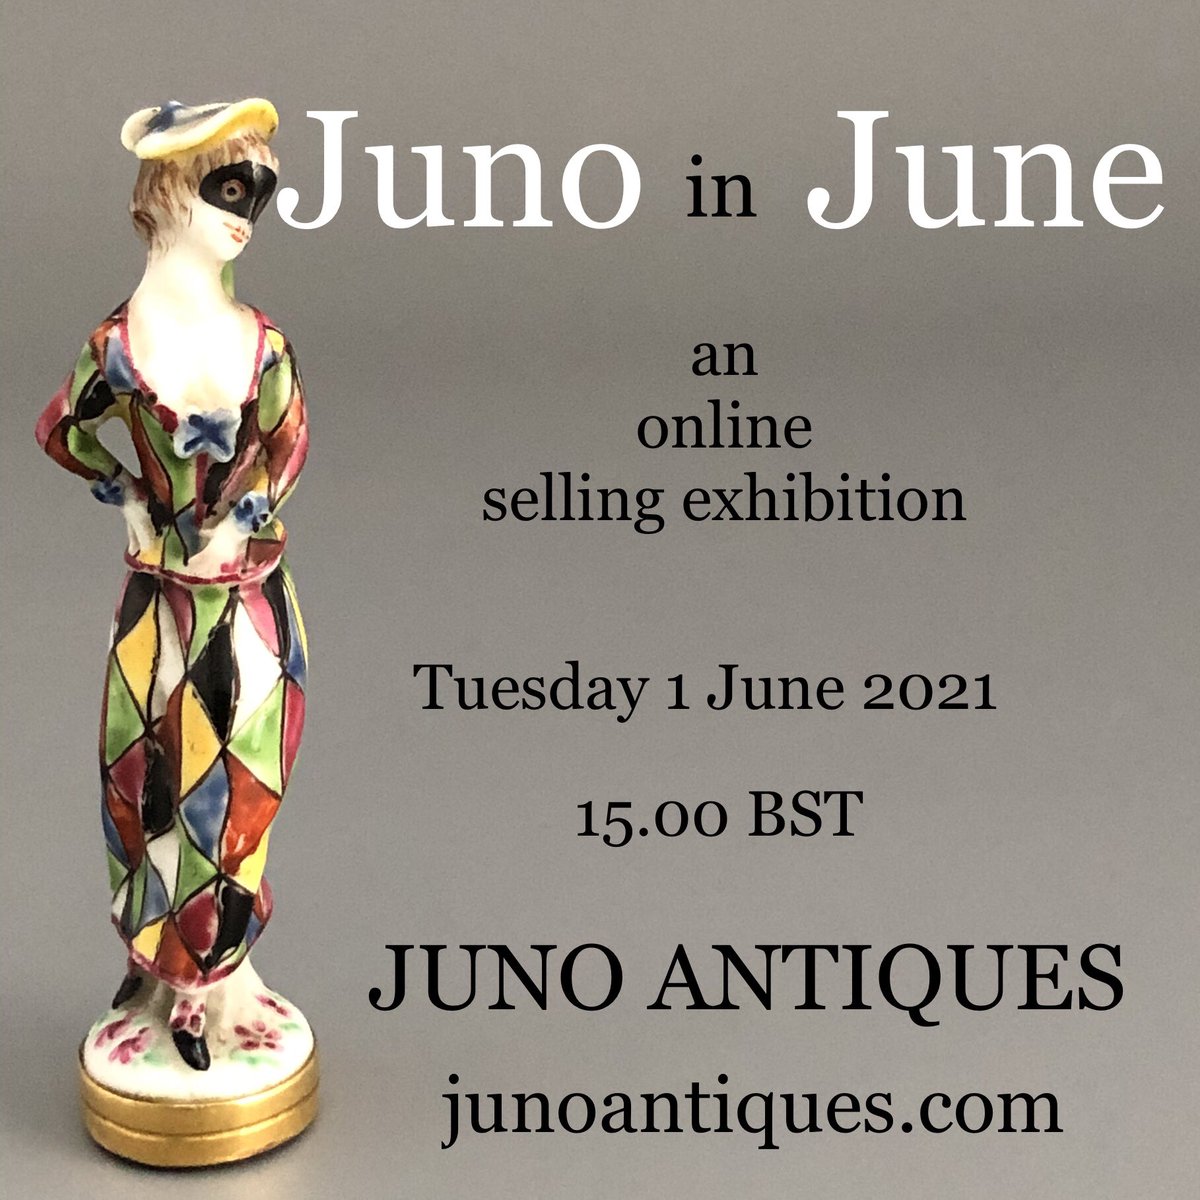 Very excited about our upcoming online selling exhibition, where we will be offering more than thirty of our recent acquisitions, covering ceramics from England, Europe, and the Far East. ‘Juno in June’, available at junoantiques.com on Tuesday 1 June, from 15.00 BST.